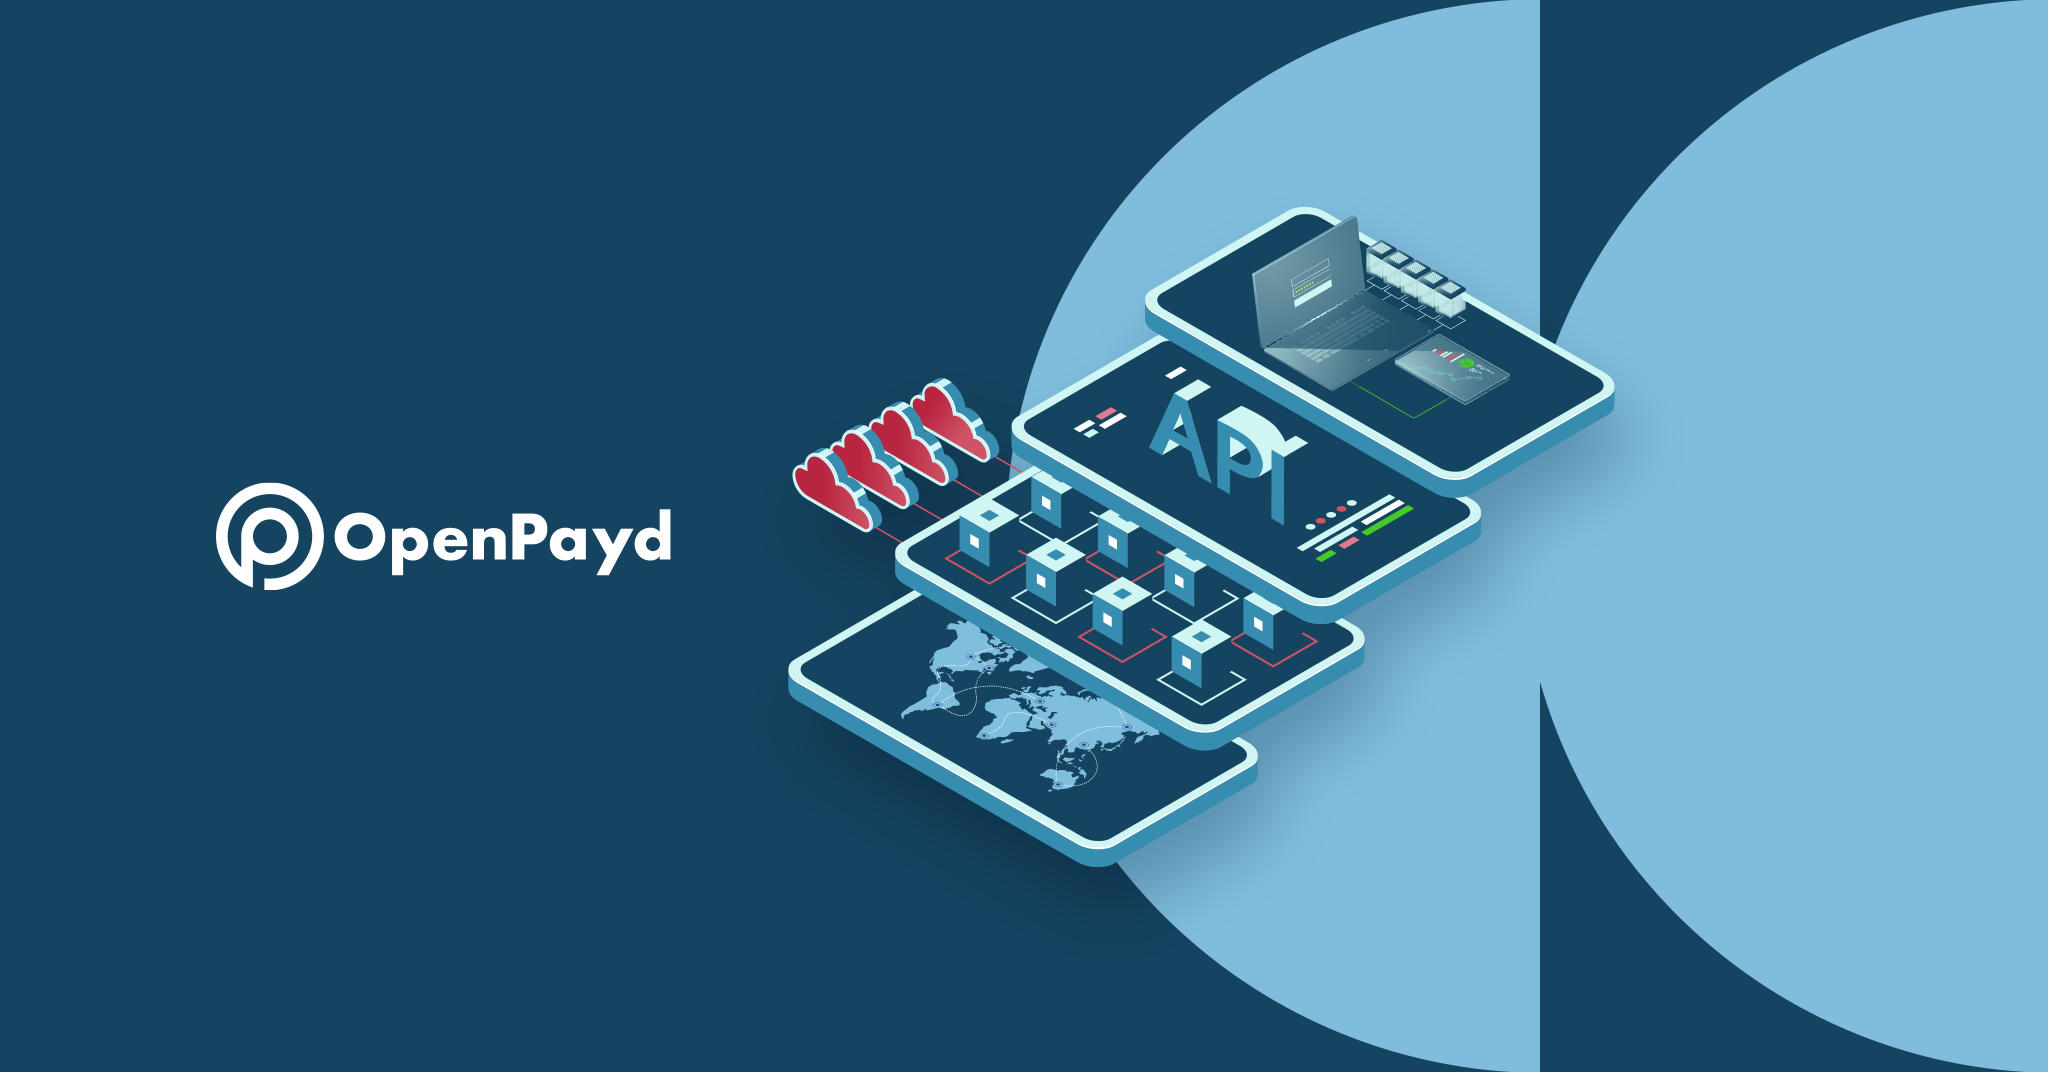 The OpenPayd offerings